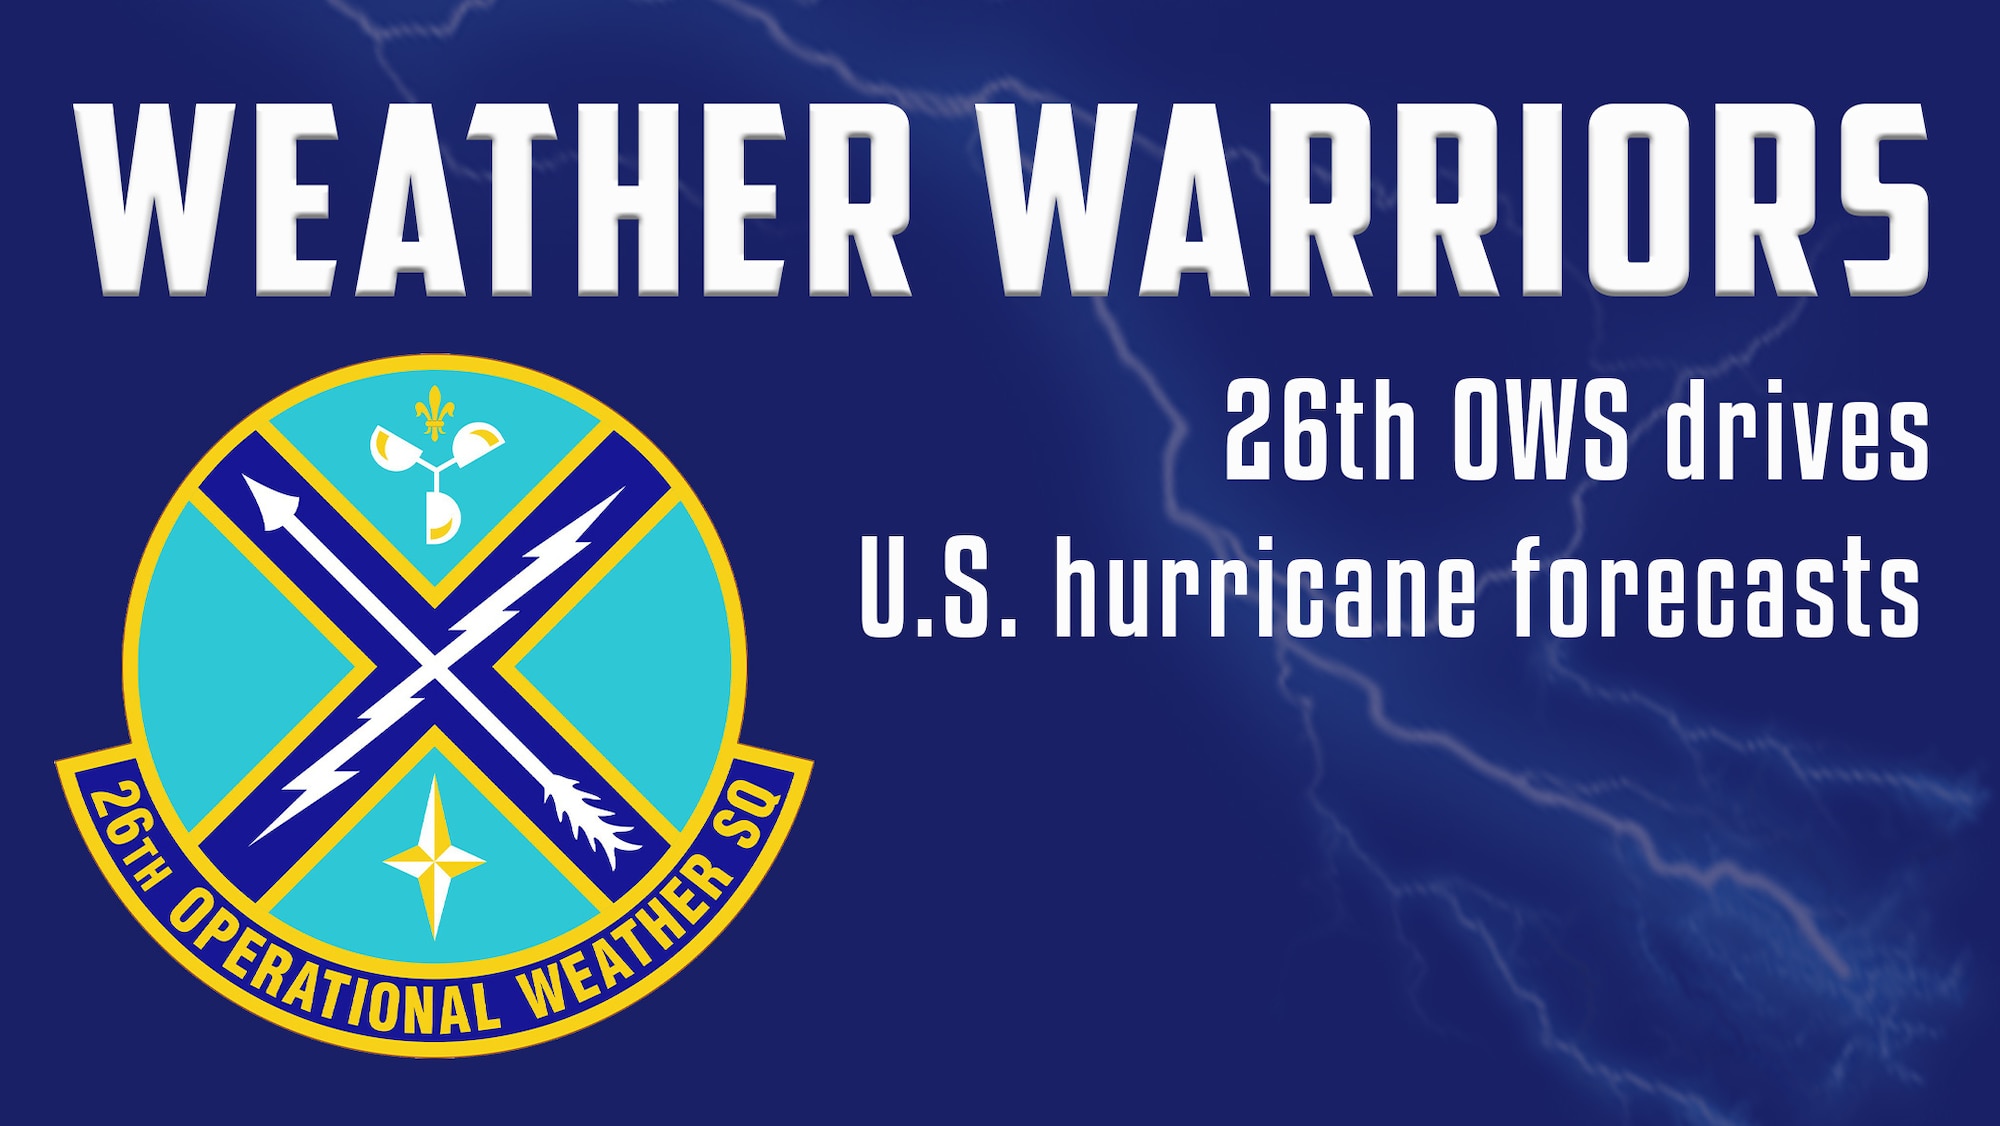 This graphic was created to accompany Weather Warriors: 26th OWS drives U.S. hurricane forecasts. Airmen from the 26th Operational Weather Squadron provide meteorological data for all tropical storms affecting U.S. Northern Command assets. (U.S. Air Force graphic by Senior Airman Jacob B. Wrightsman)